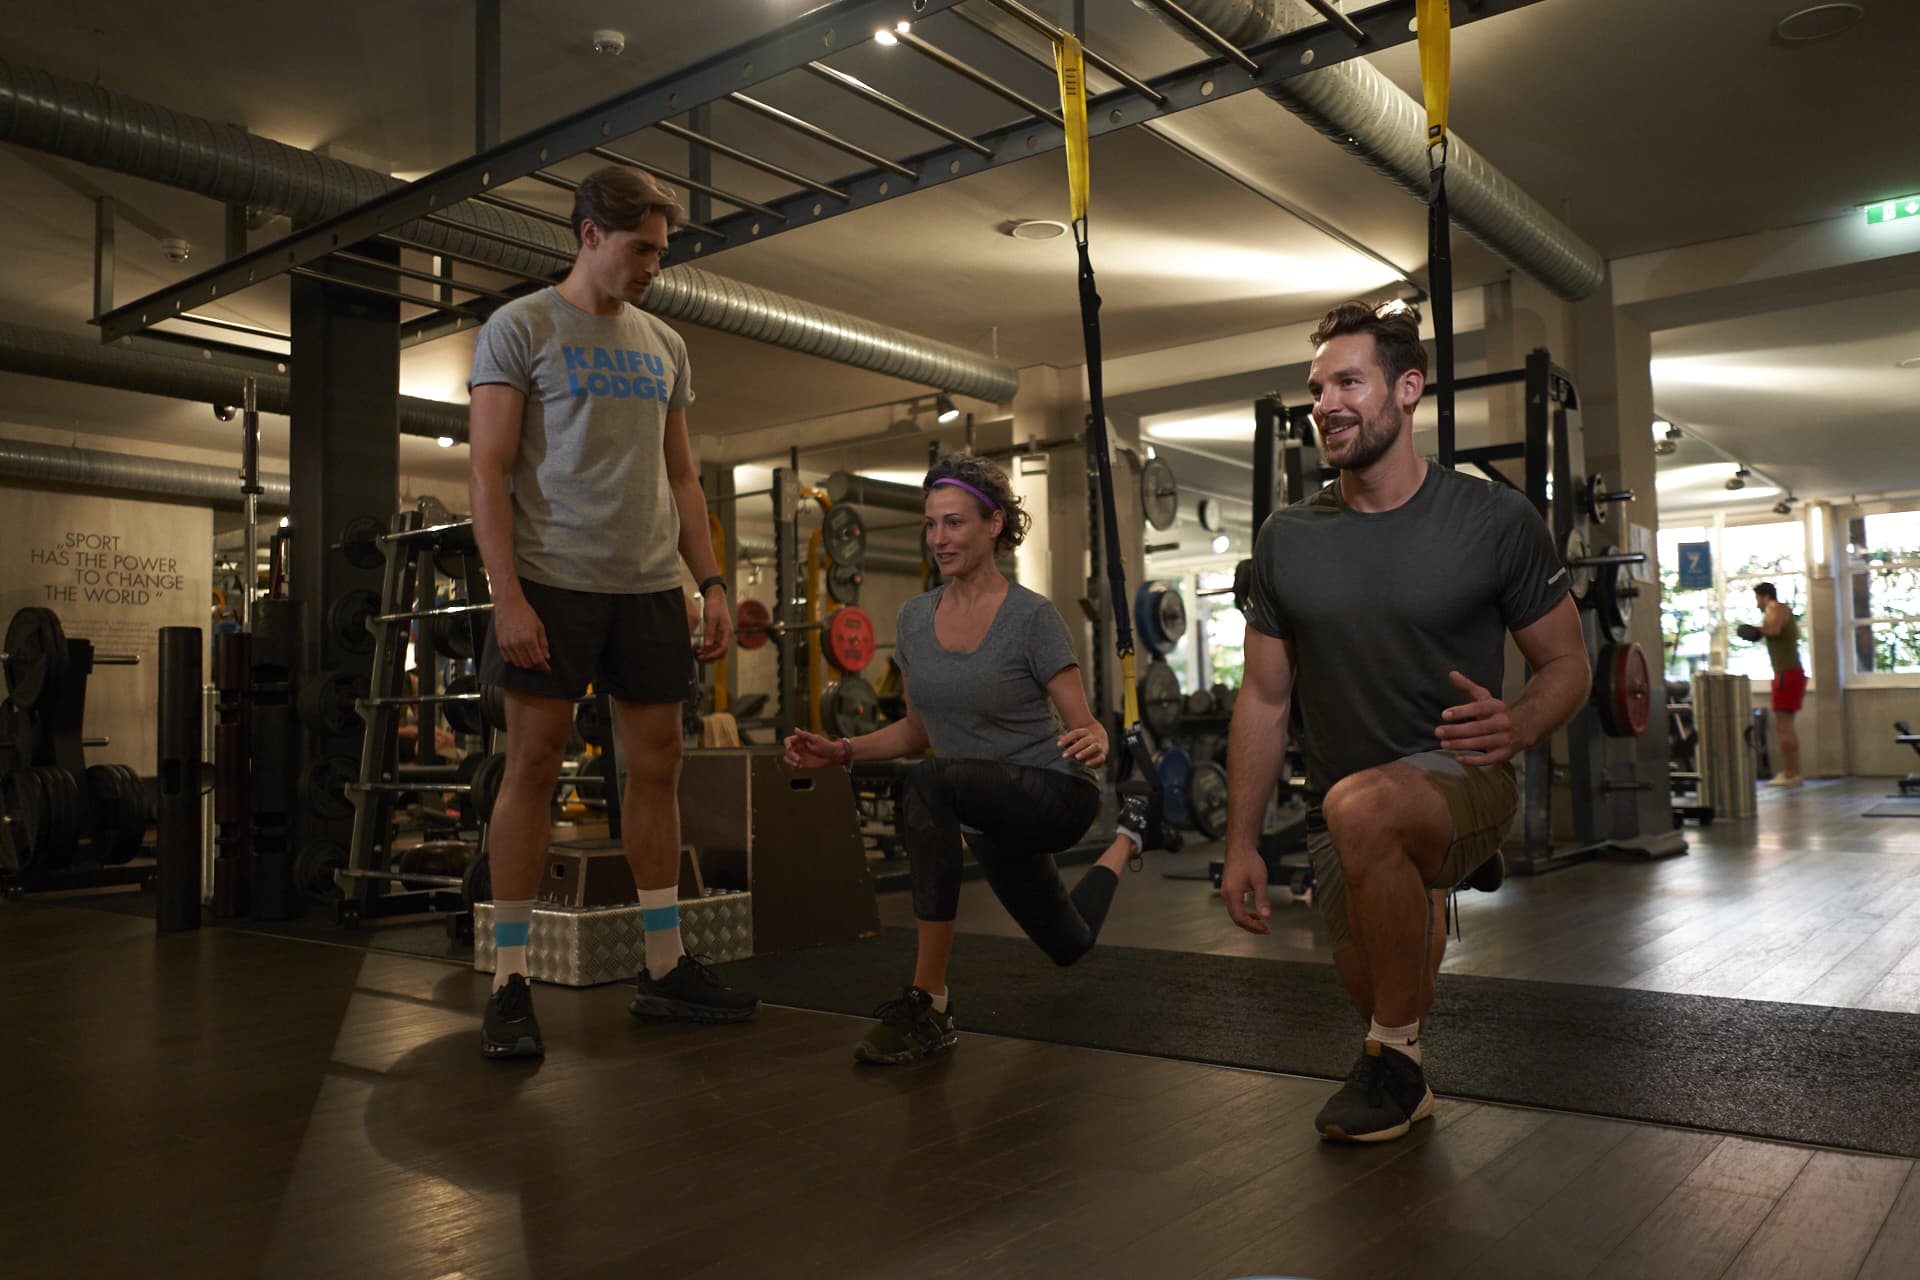 A trainer gives ndividual coaching and personal training to a man and a woman in the gym